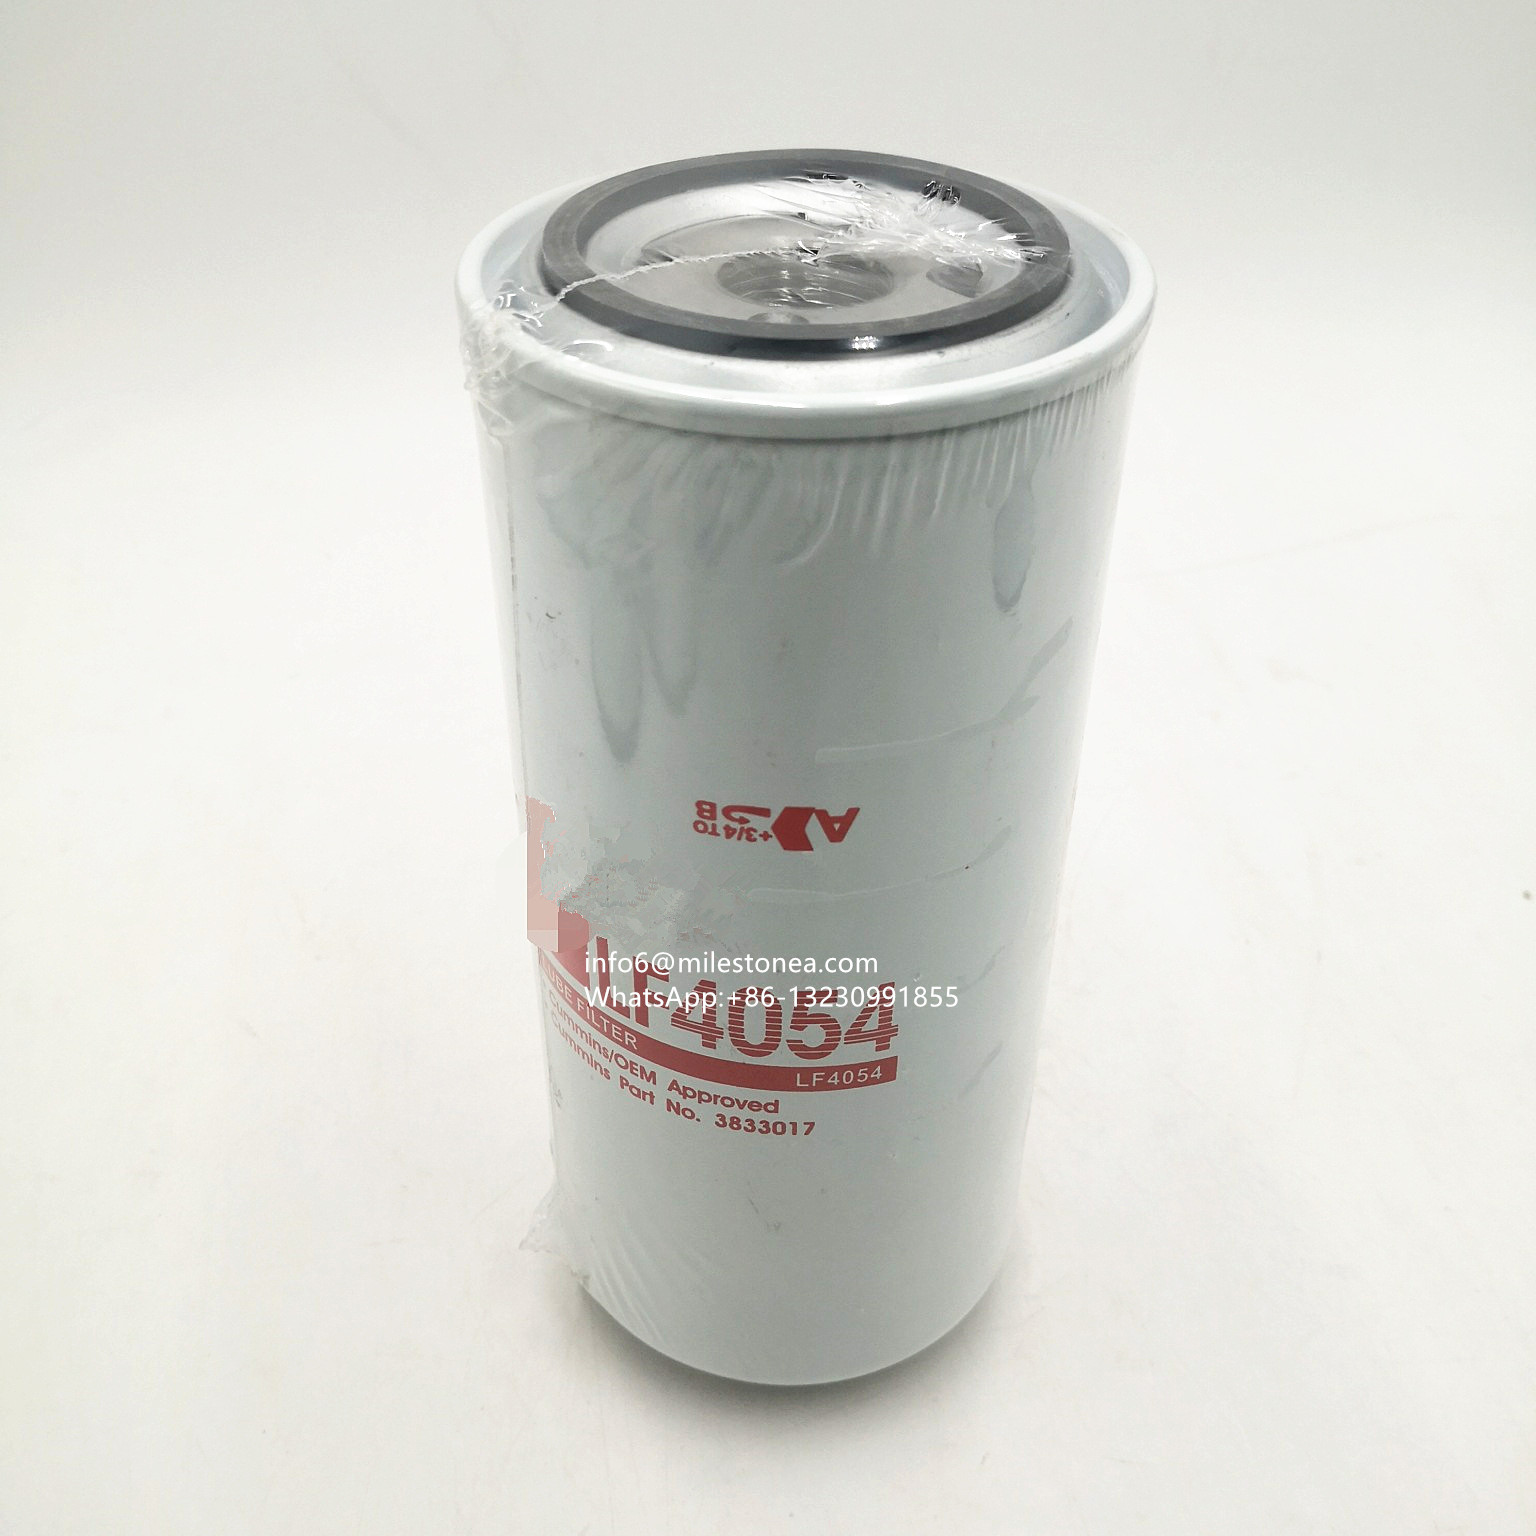 China manufacturer oil filter LF4054 for Construction machinery generator engine parts